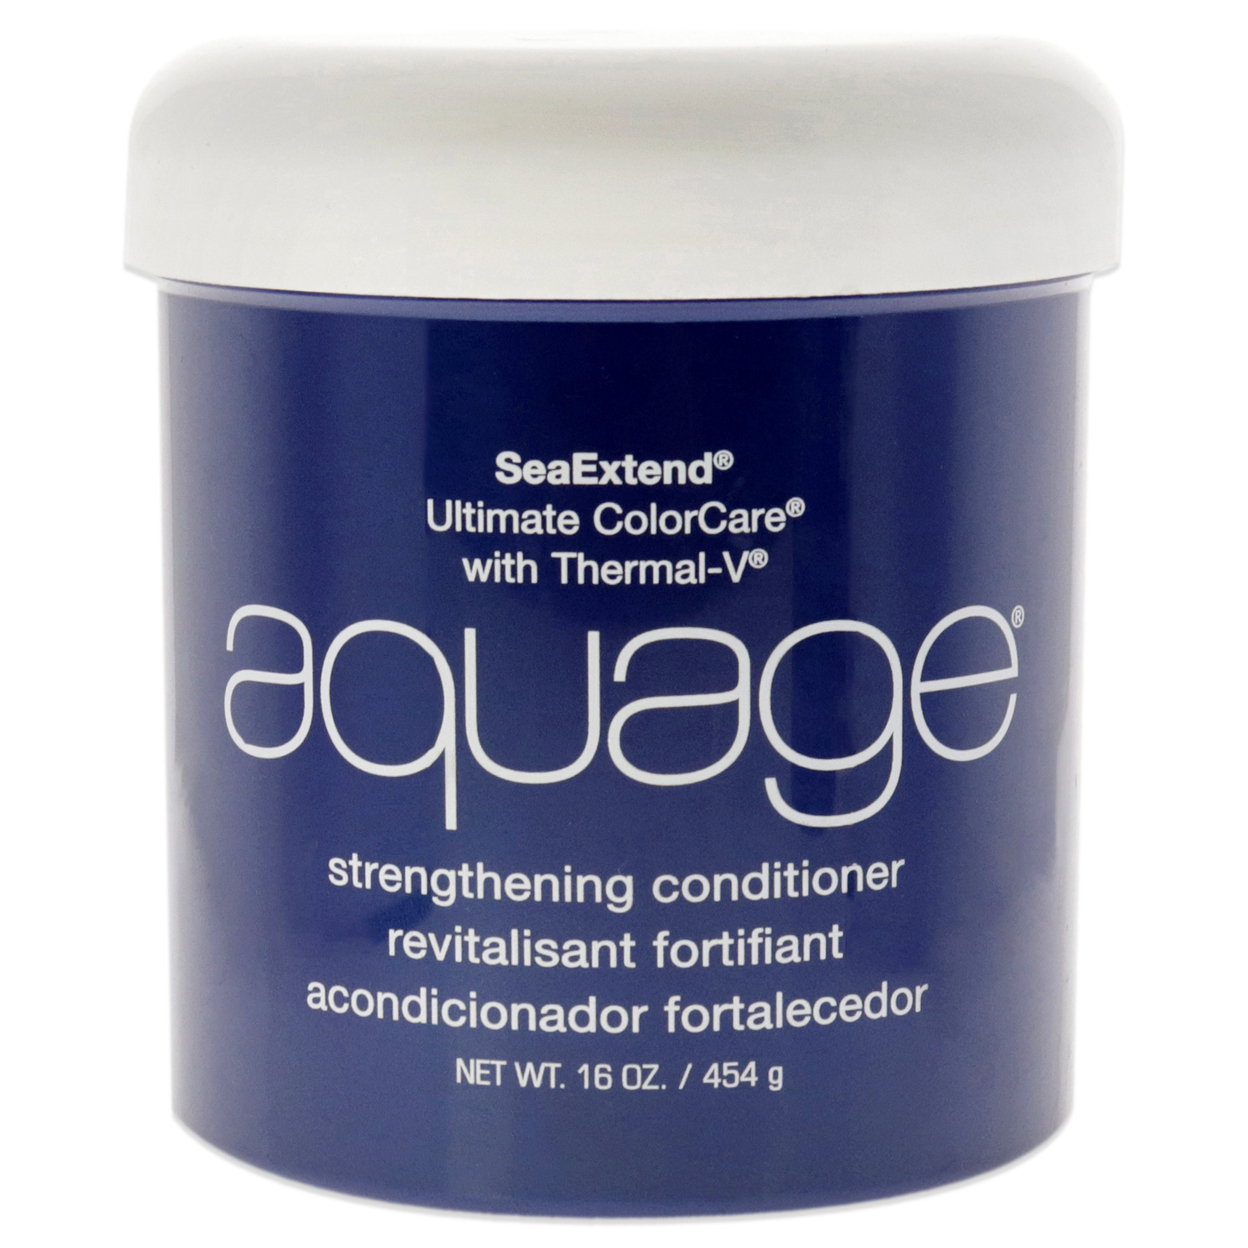 Aquage Seaextend Ultimate Colorcare With Thermal-V Strengthening Conditioner Conditioner 16 Oz